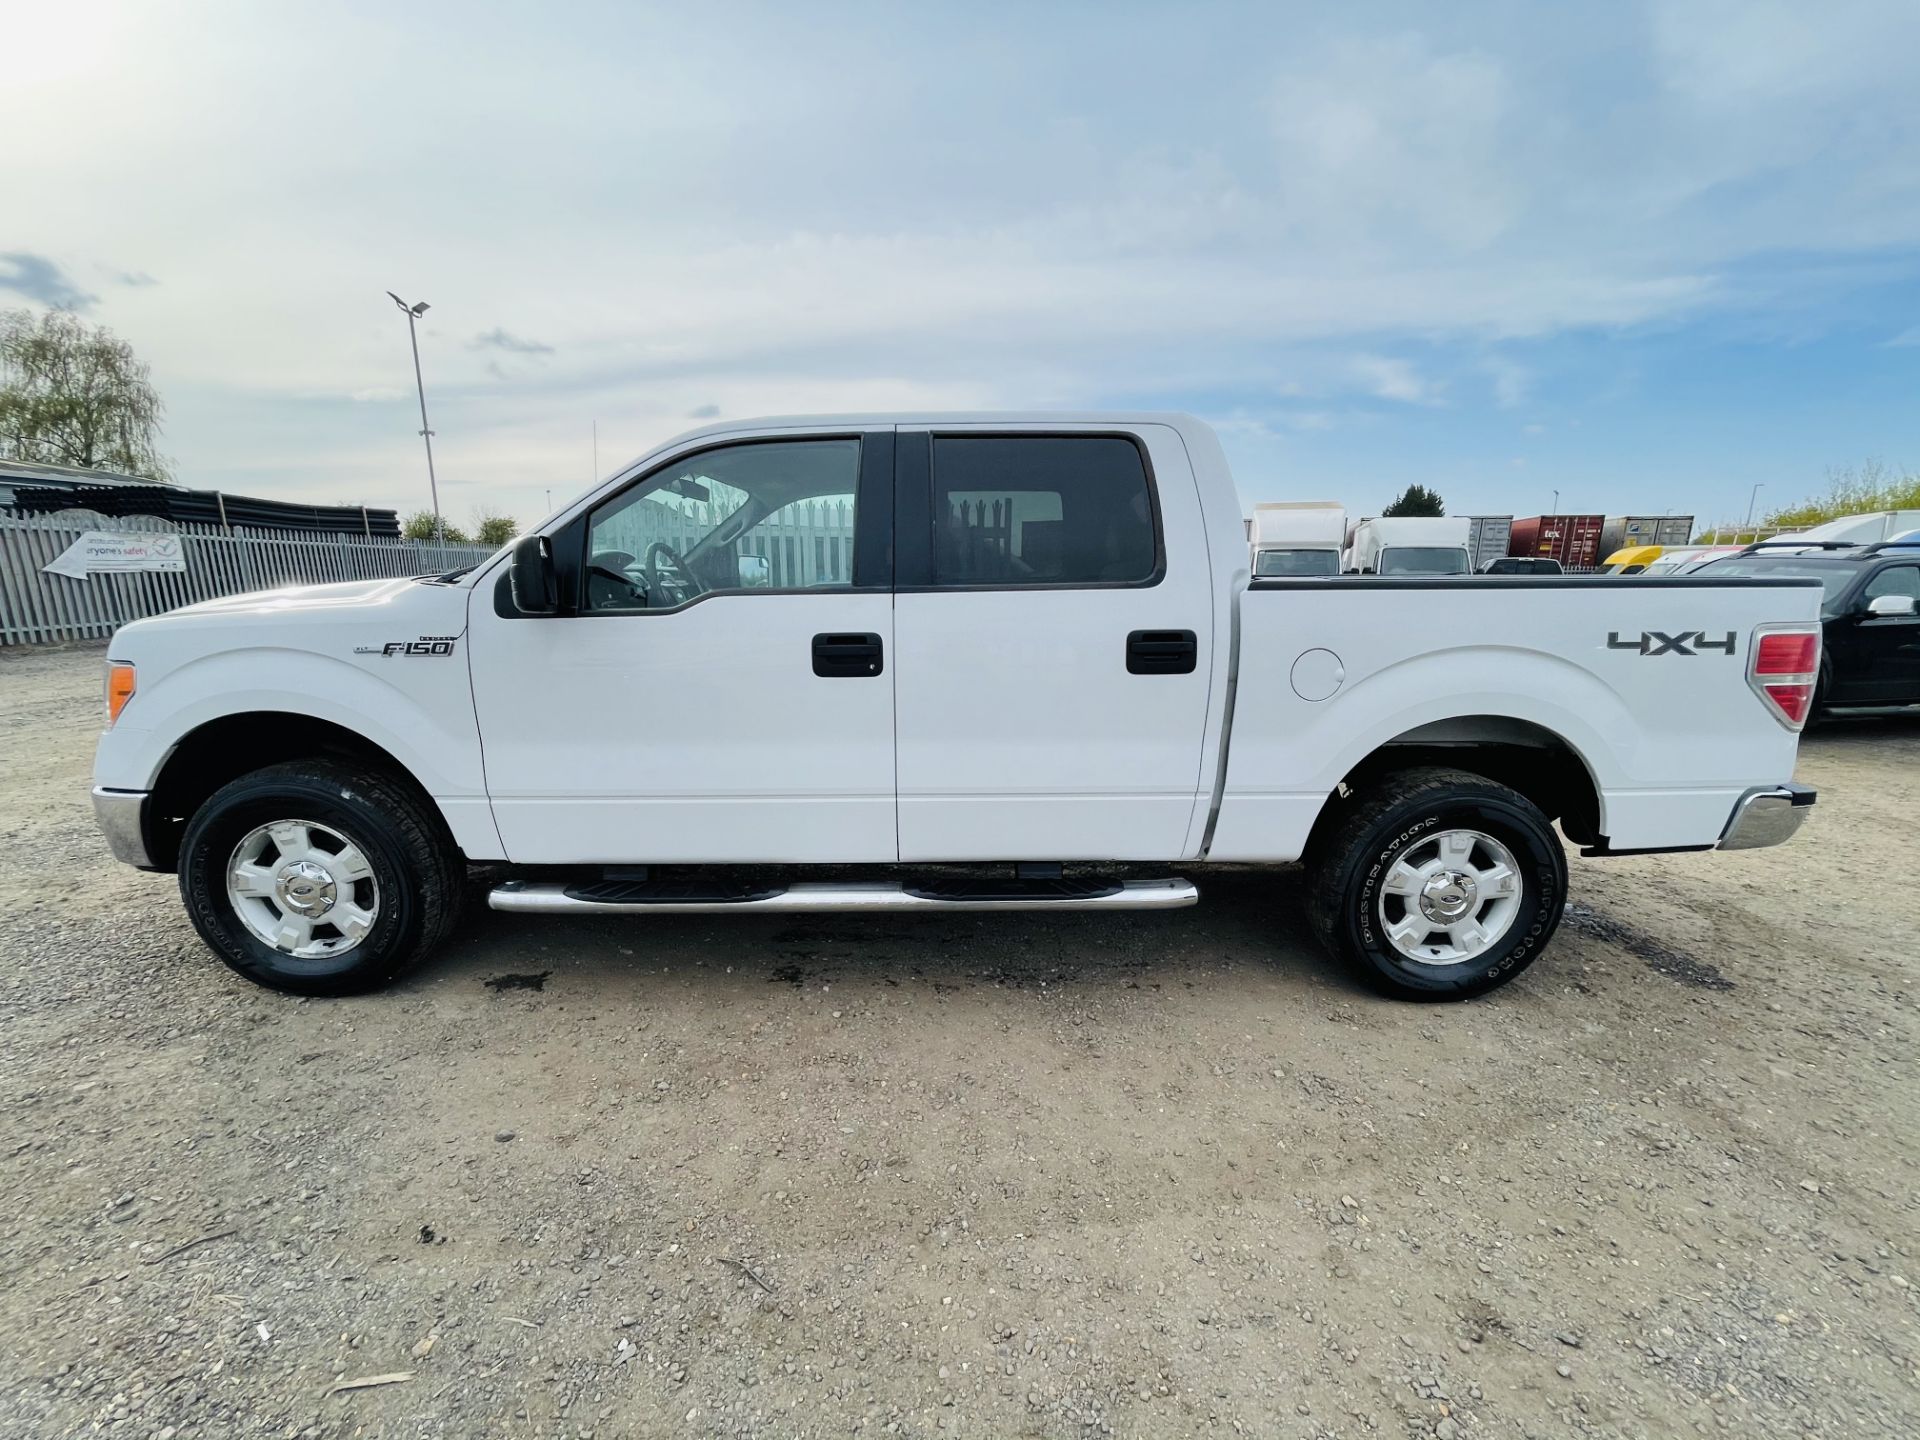 Ford F-150 XLT 4.6L V8 Super-crew 4WD 2010 ' 2010 Year' 6 Seats - Air con - NO RESERVE - Image 6 of 24